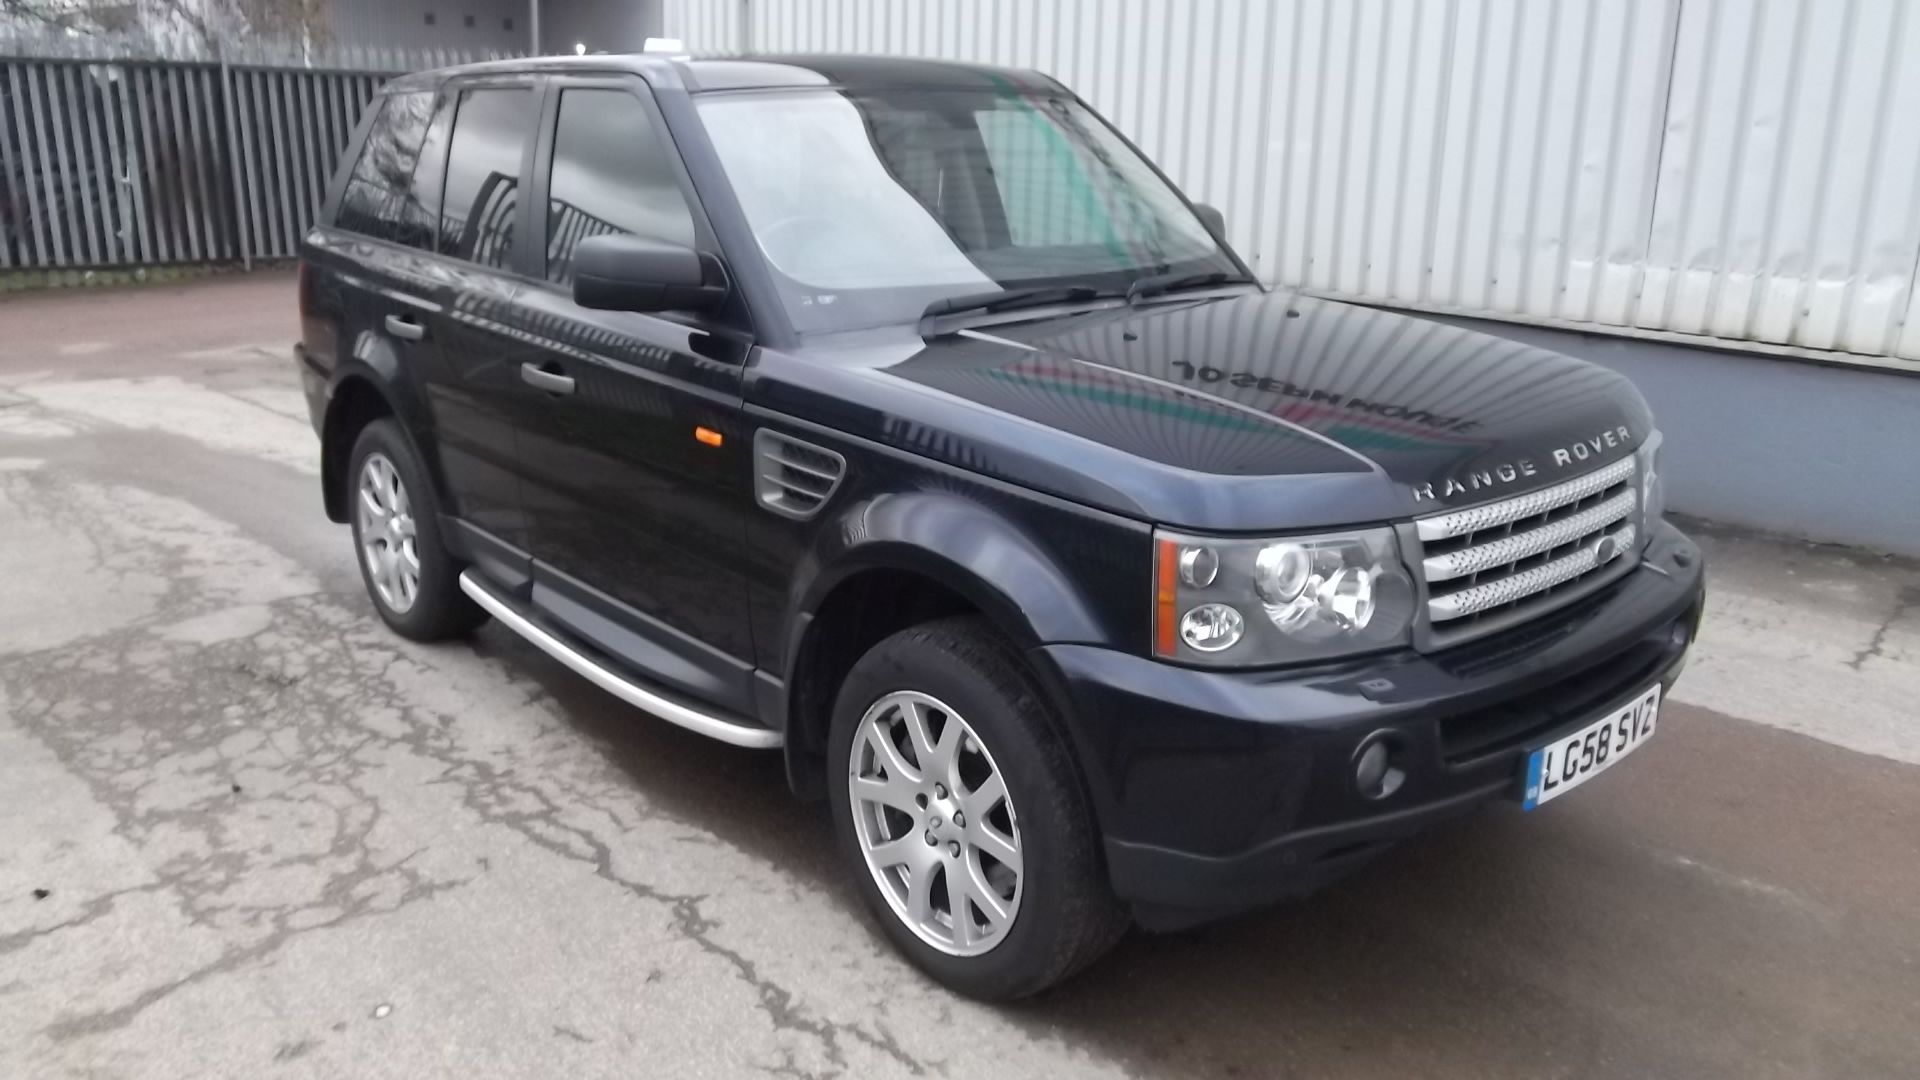 2008 Land Rover Range Rover Sp Hse 2.7 Tdv6 A 5Dr SUV - CL505 - NO VAT ON THE HAMMER - Location: Cor